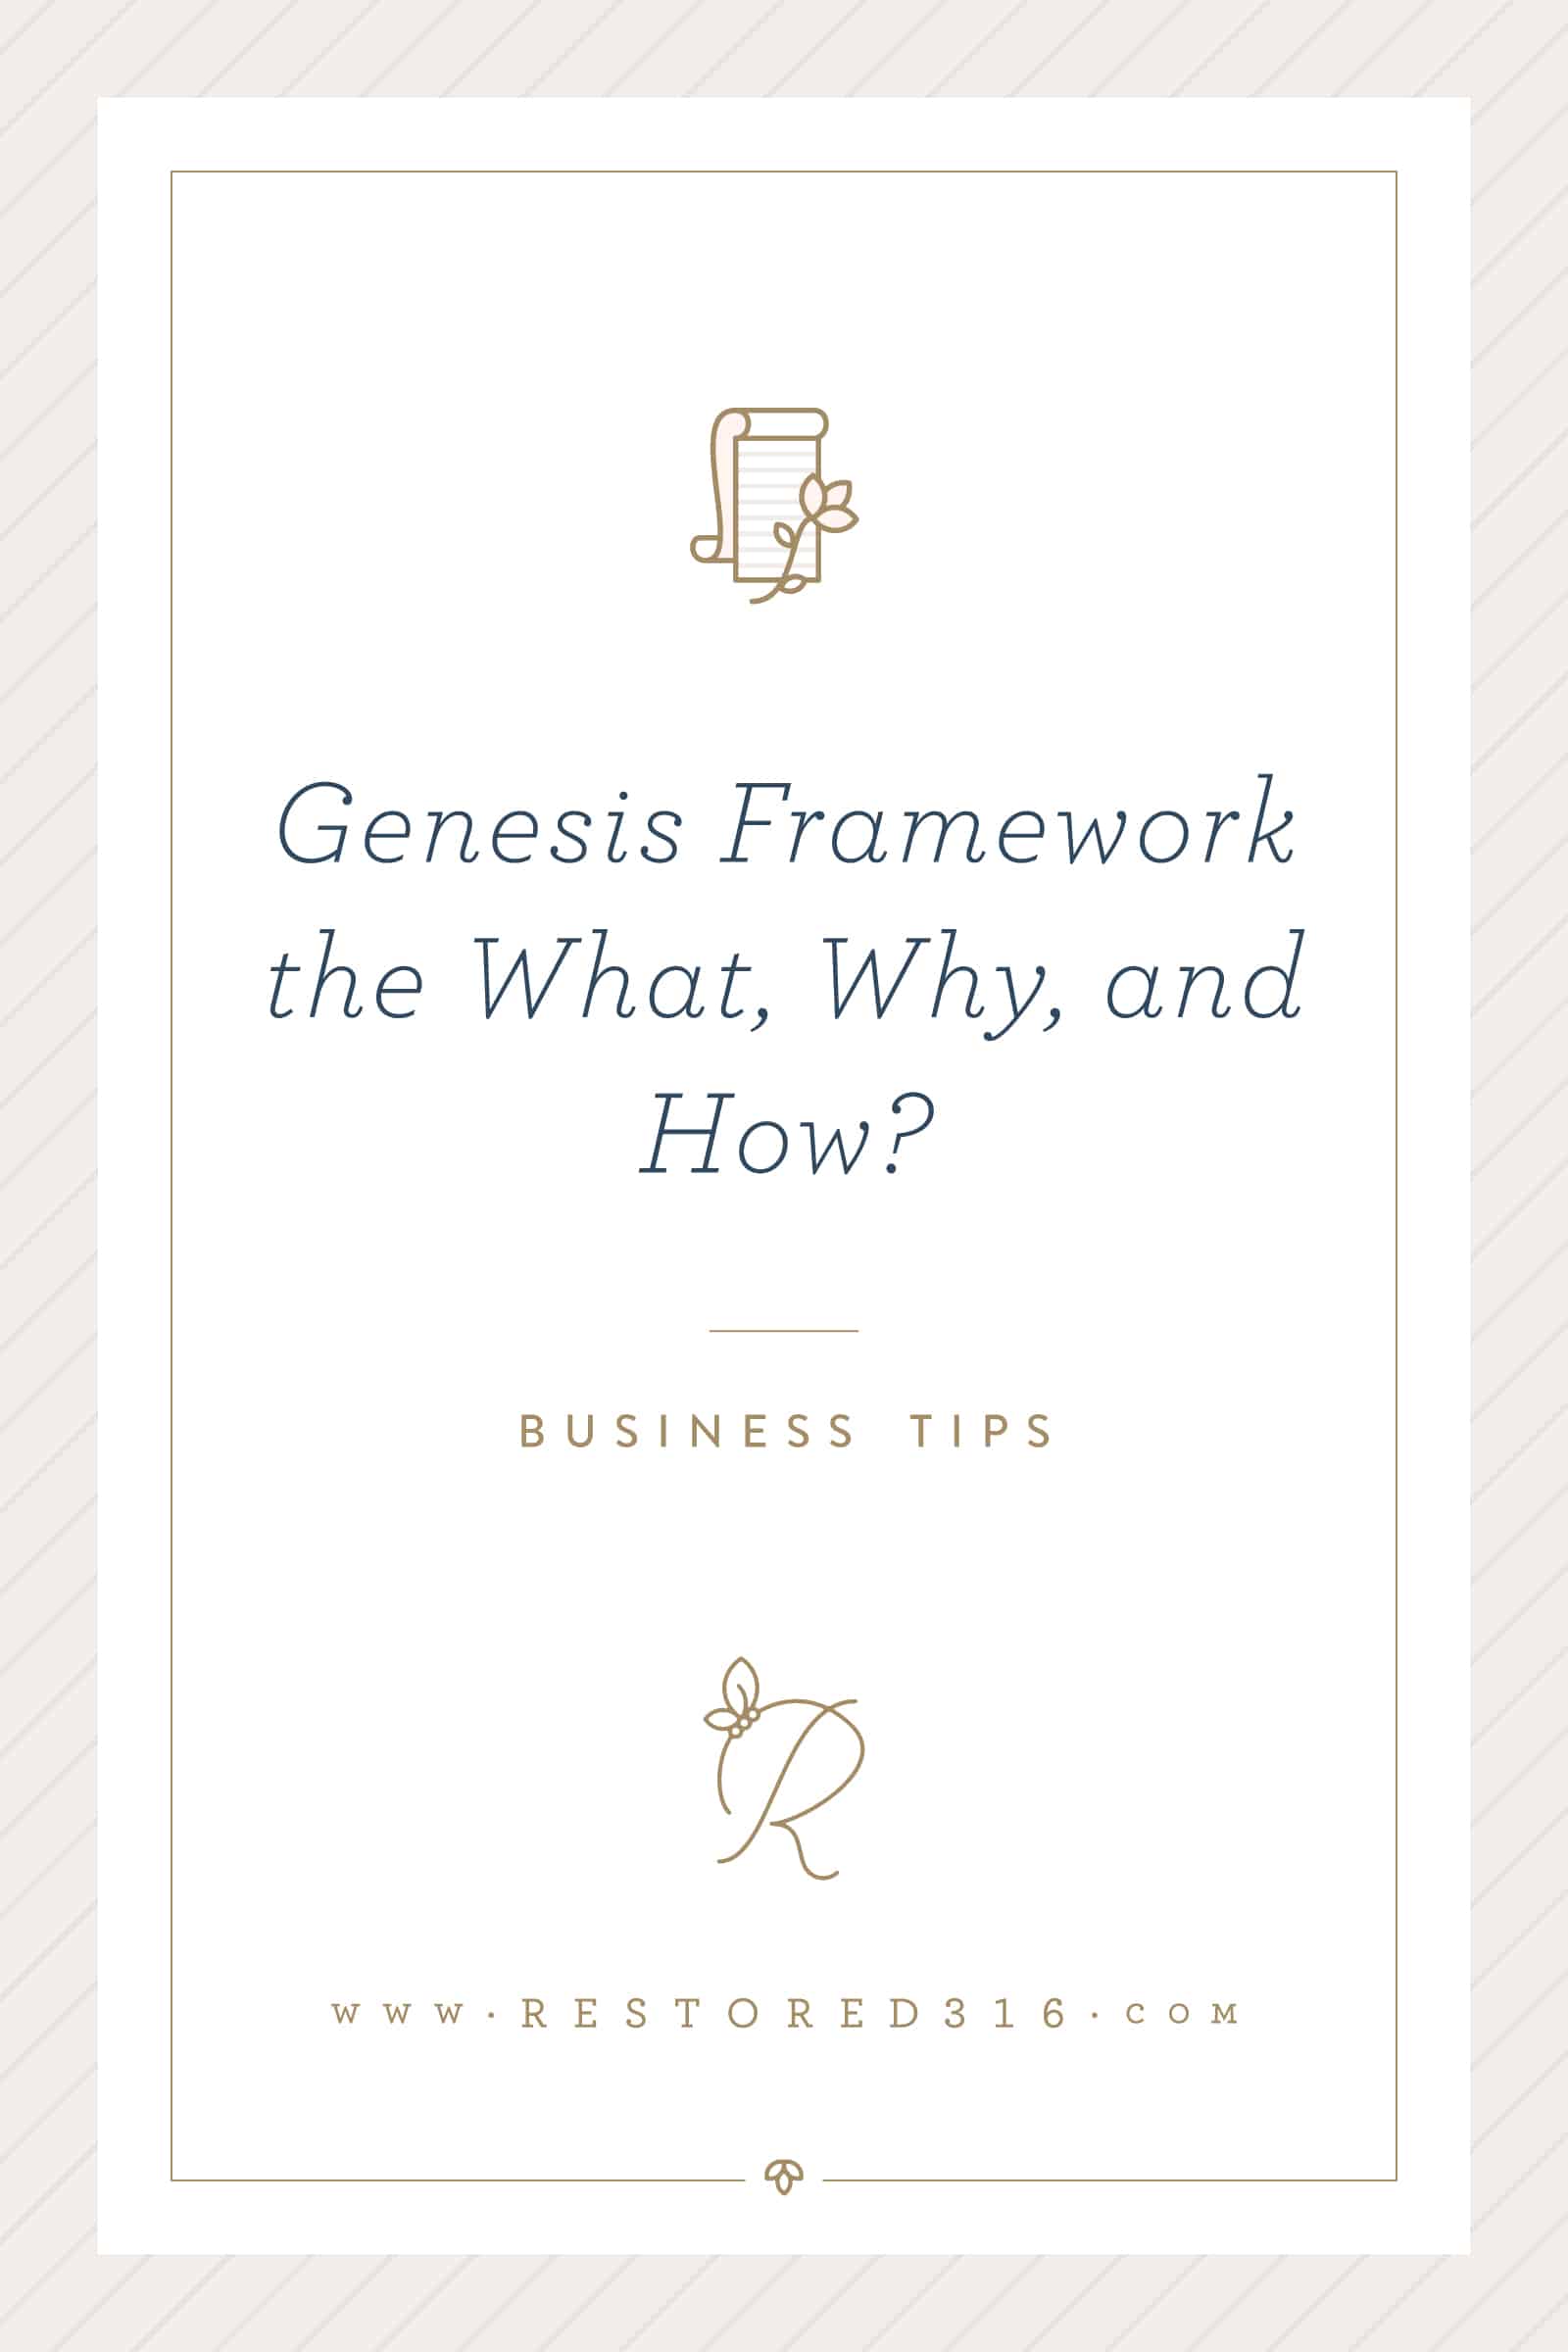 Genesis Framework: The what, why, and how?